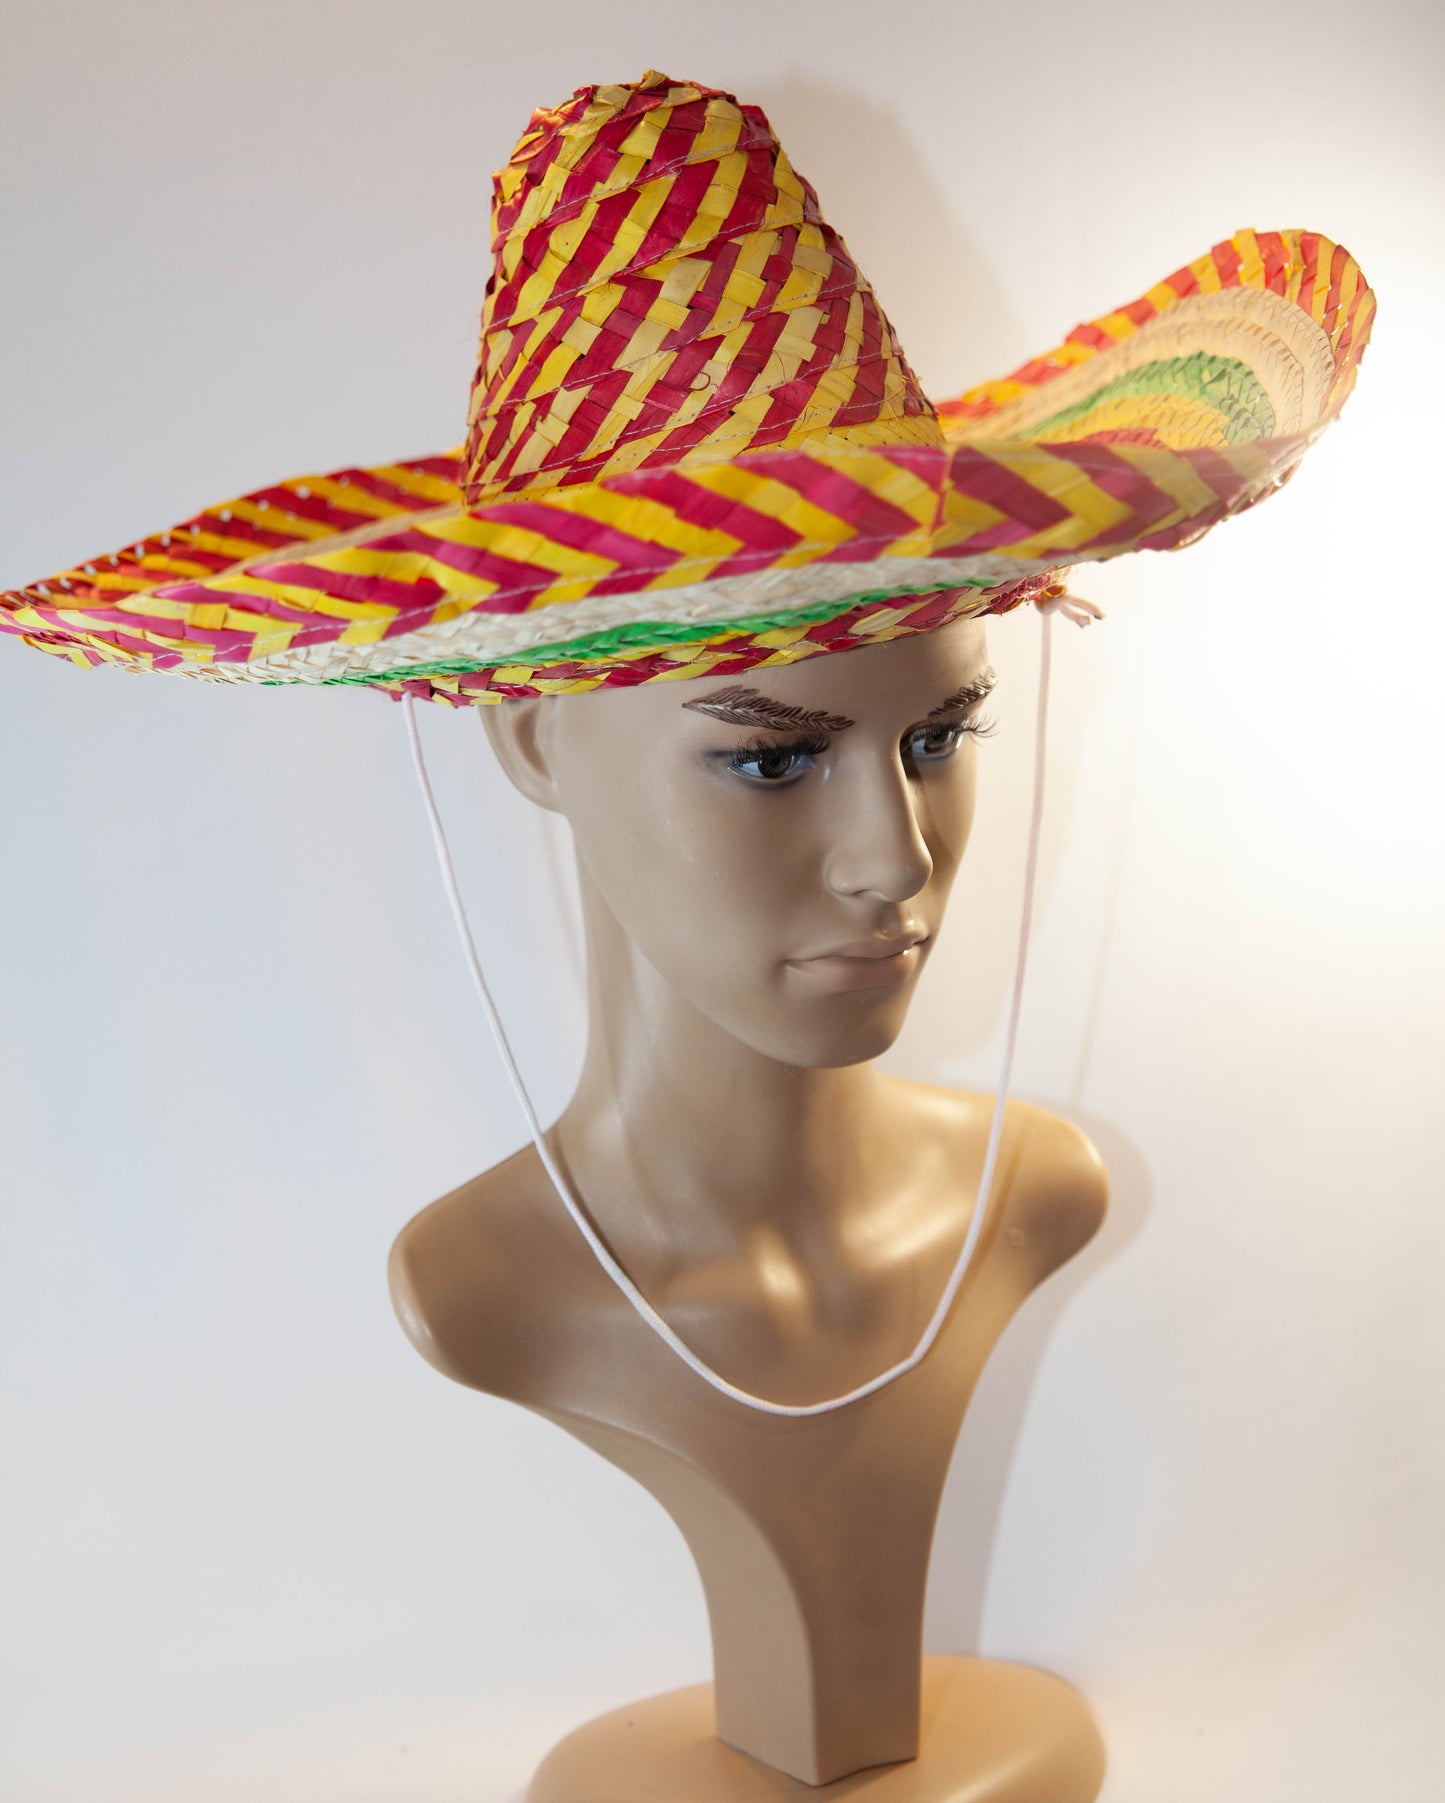 Mexican Sombrero Hat - striped patterns